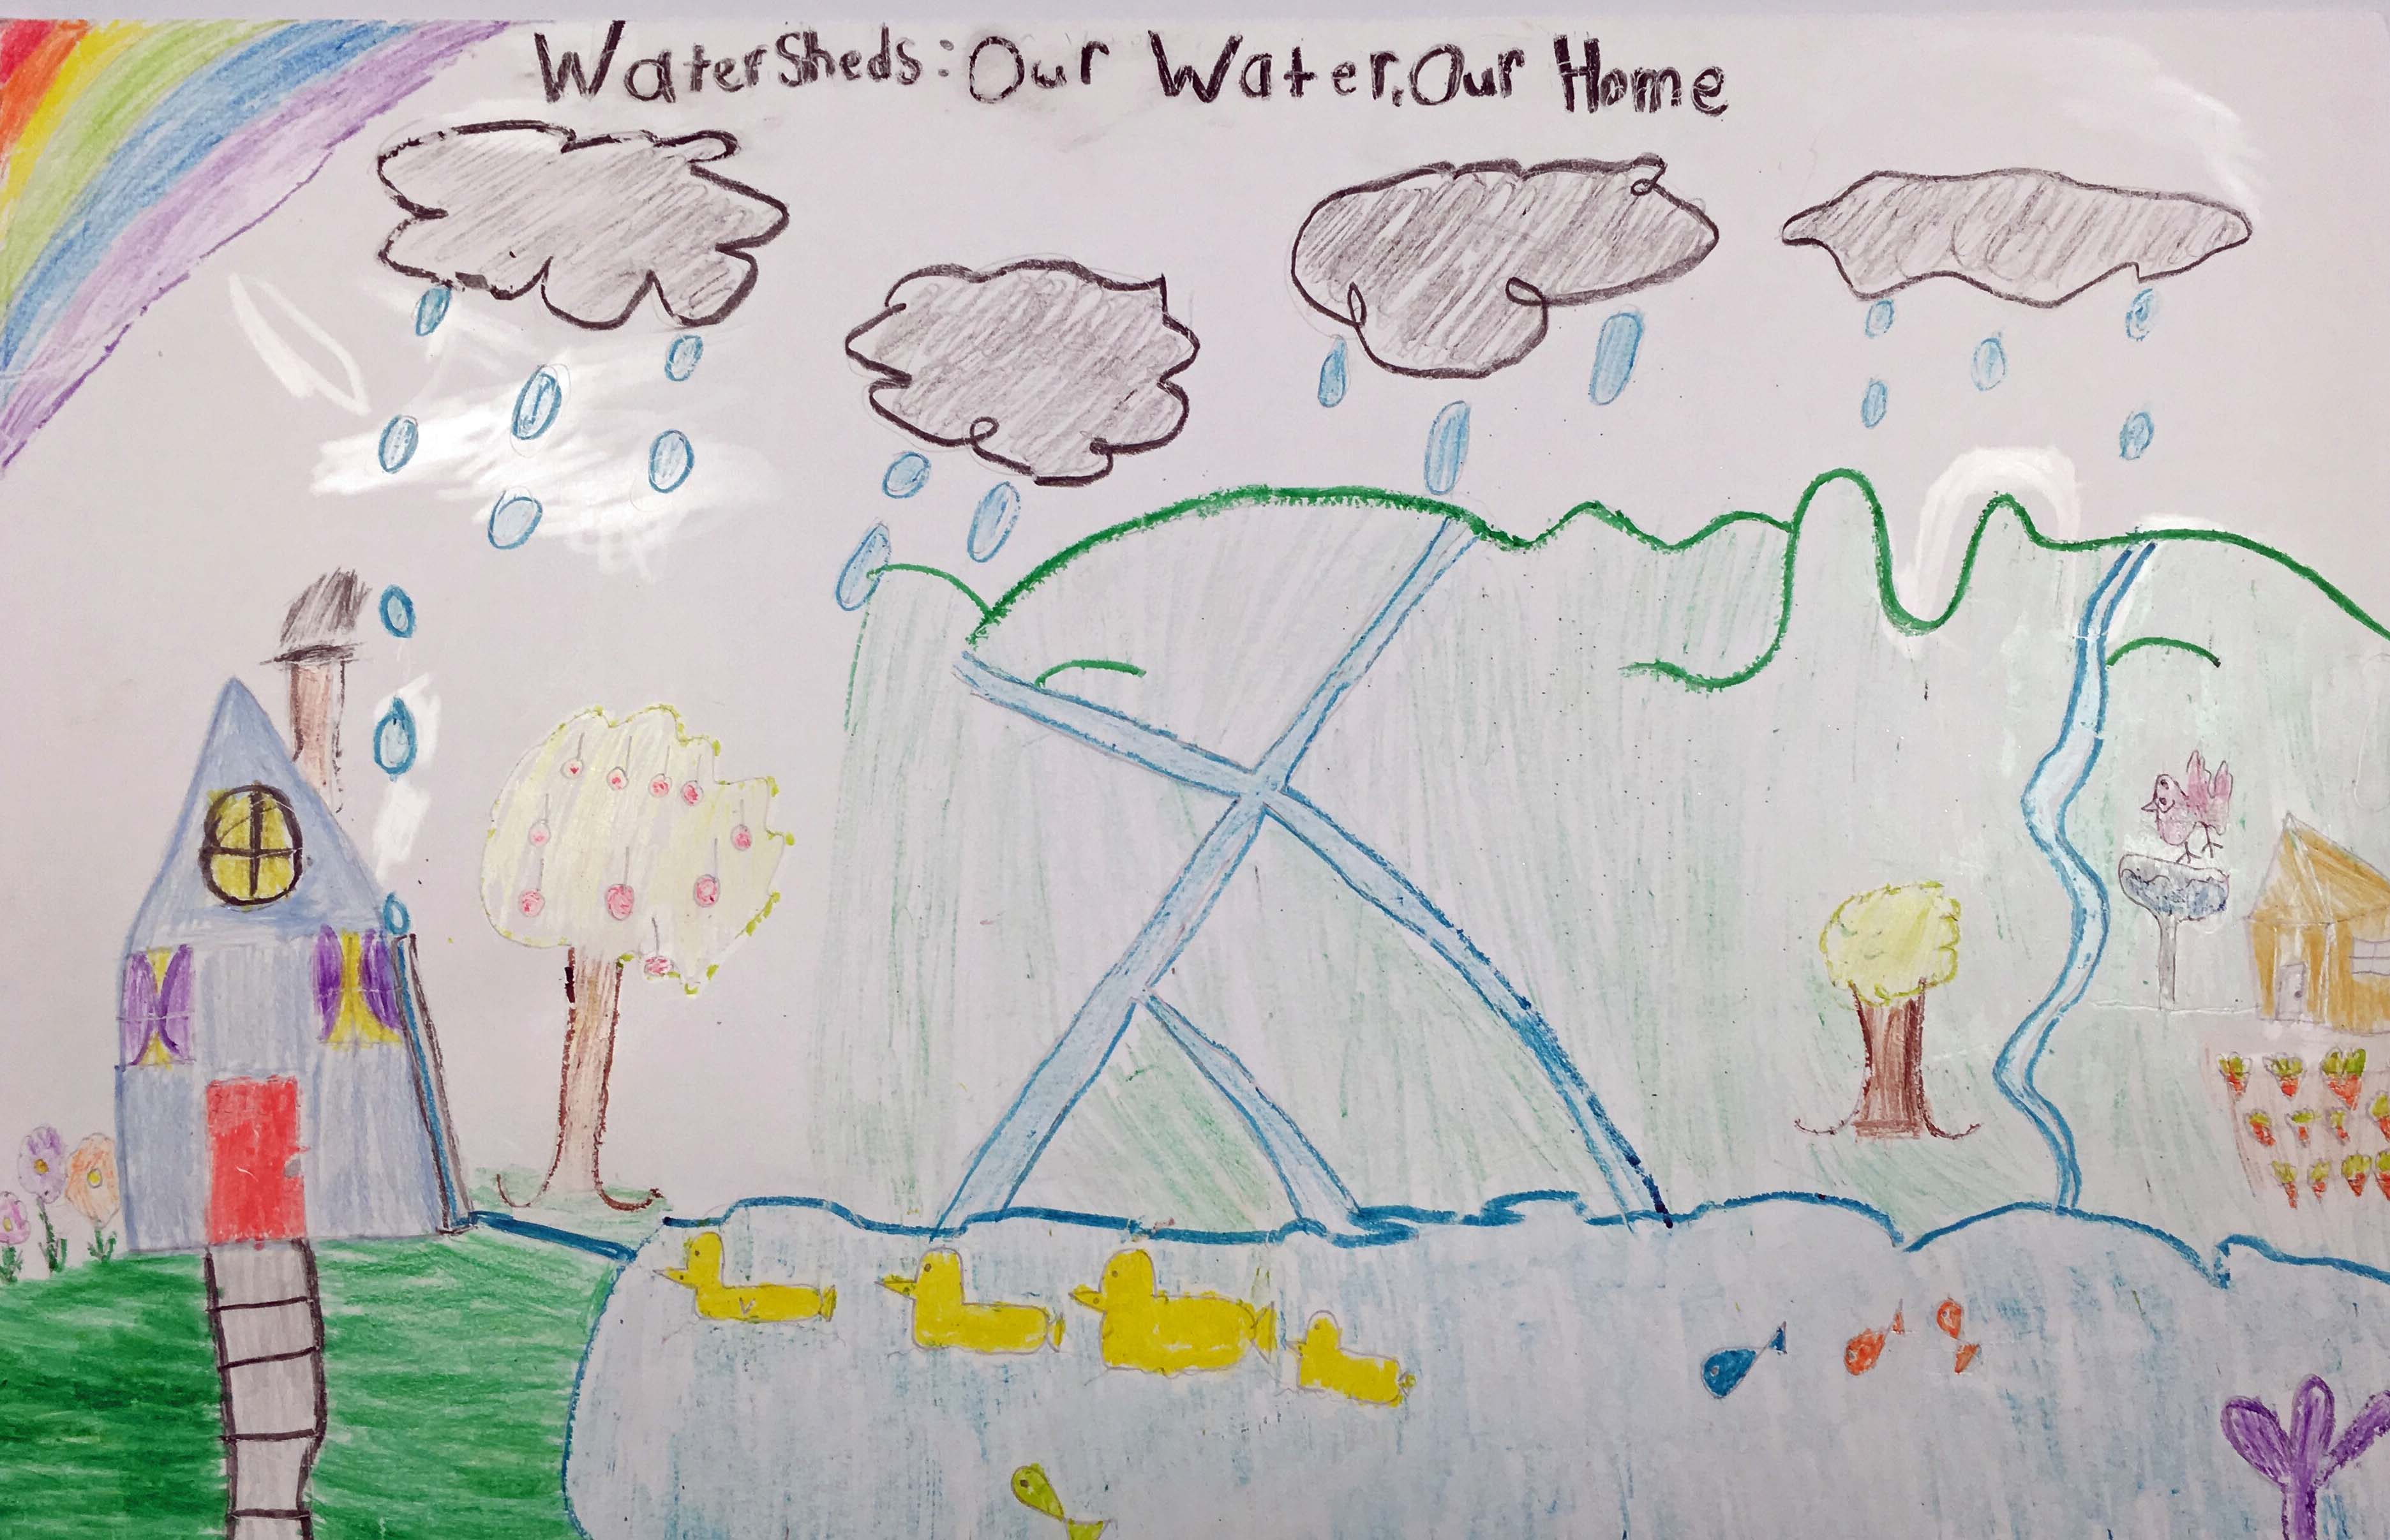 Watersheds: Our Water, Our Home Poster